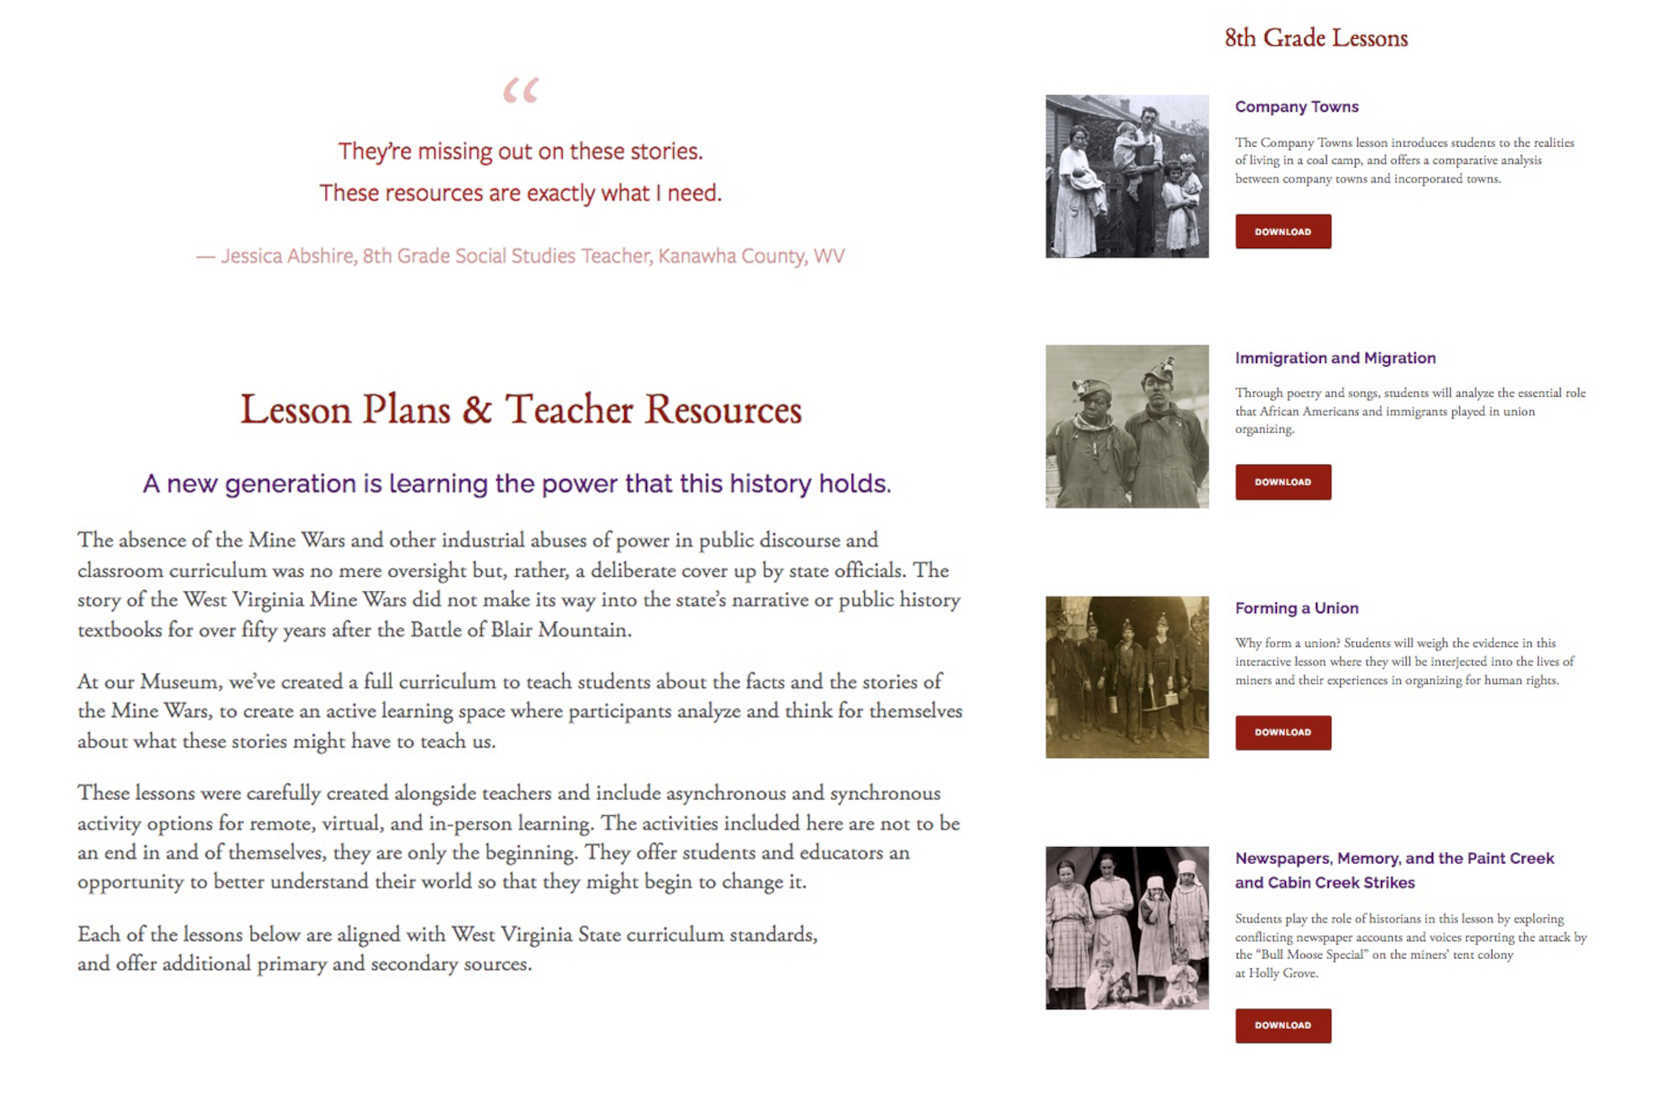 The West Virginia Mine Wars Museum has been able to leverage its digital resources to create lesson plans for K-12 classrooms. Image courtesy of the West Virginia Mine Wars Museum.